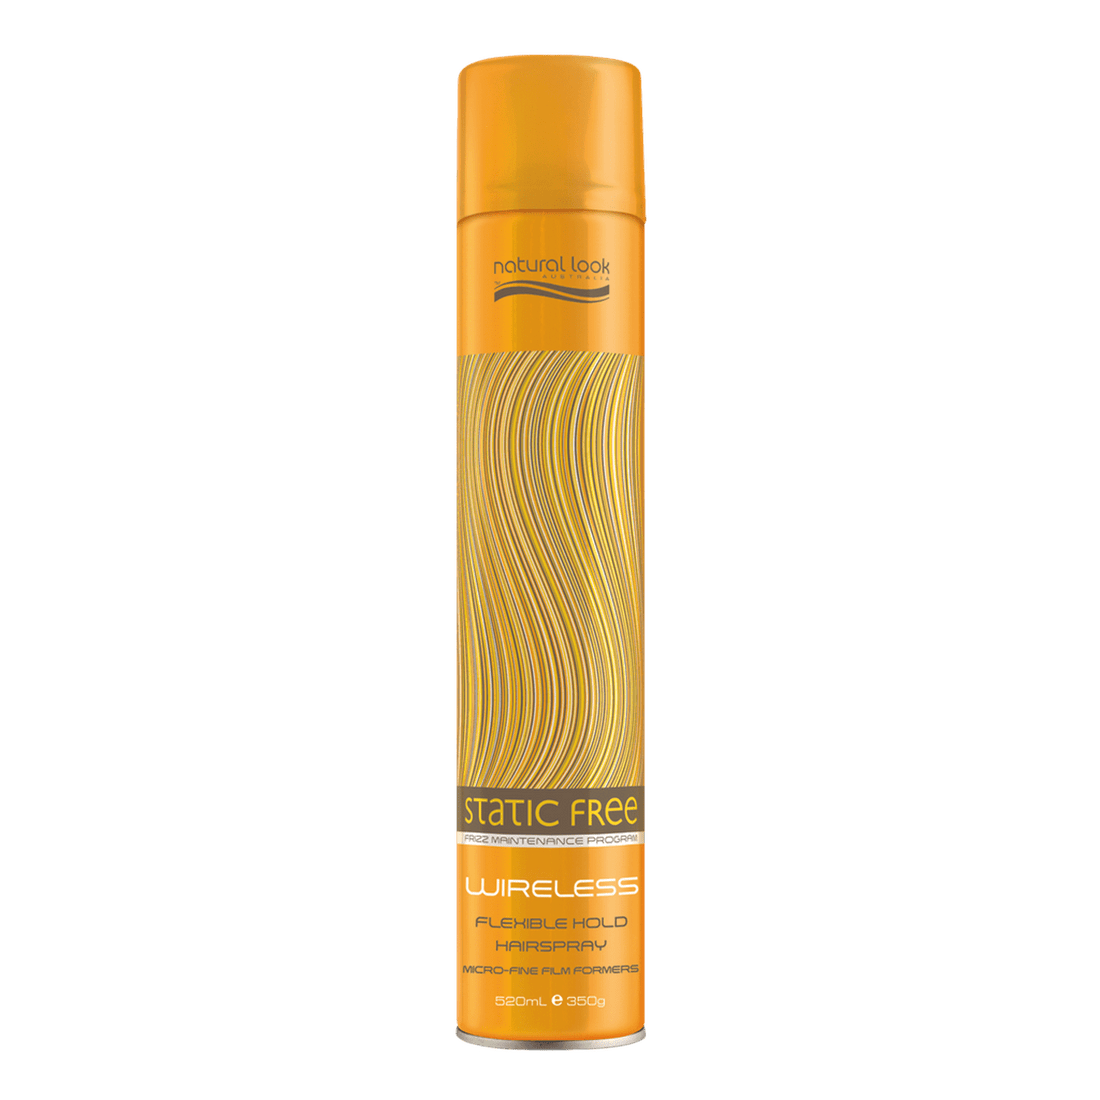 Natural Look Static Free Wireless Flexible Hold Hairspray 350g